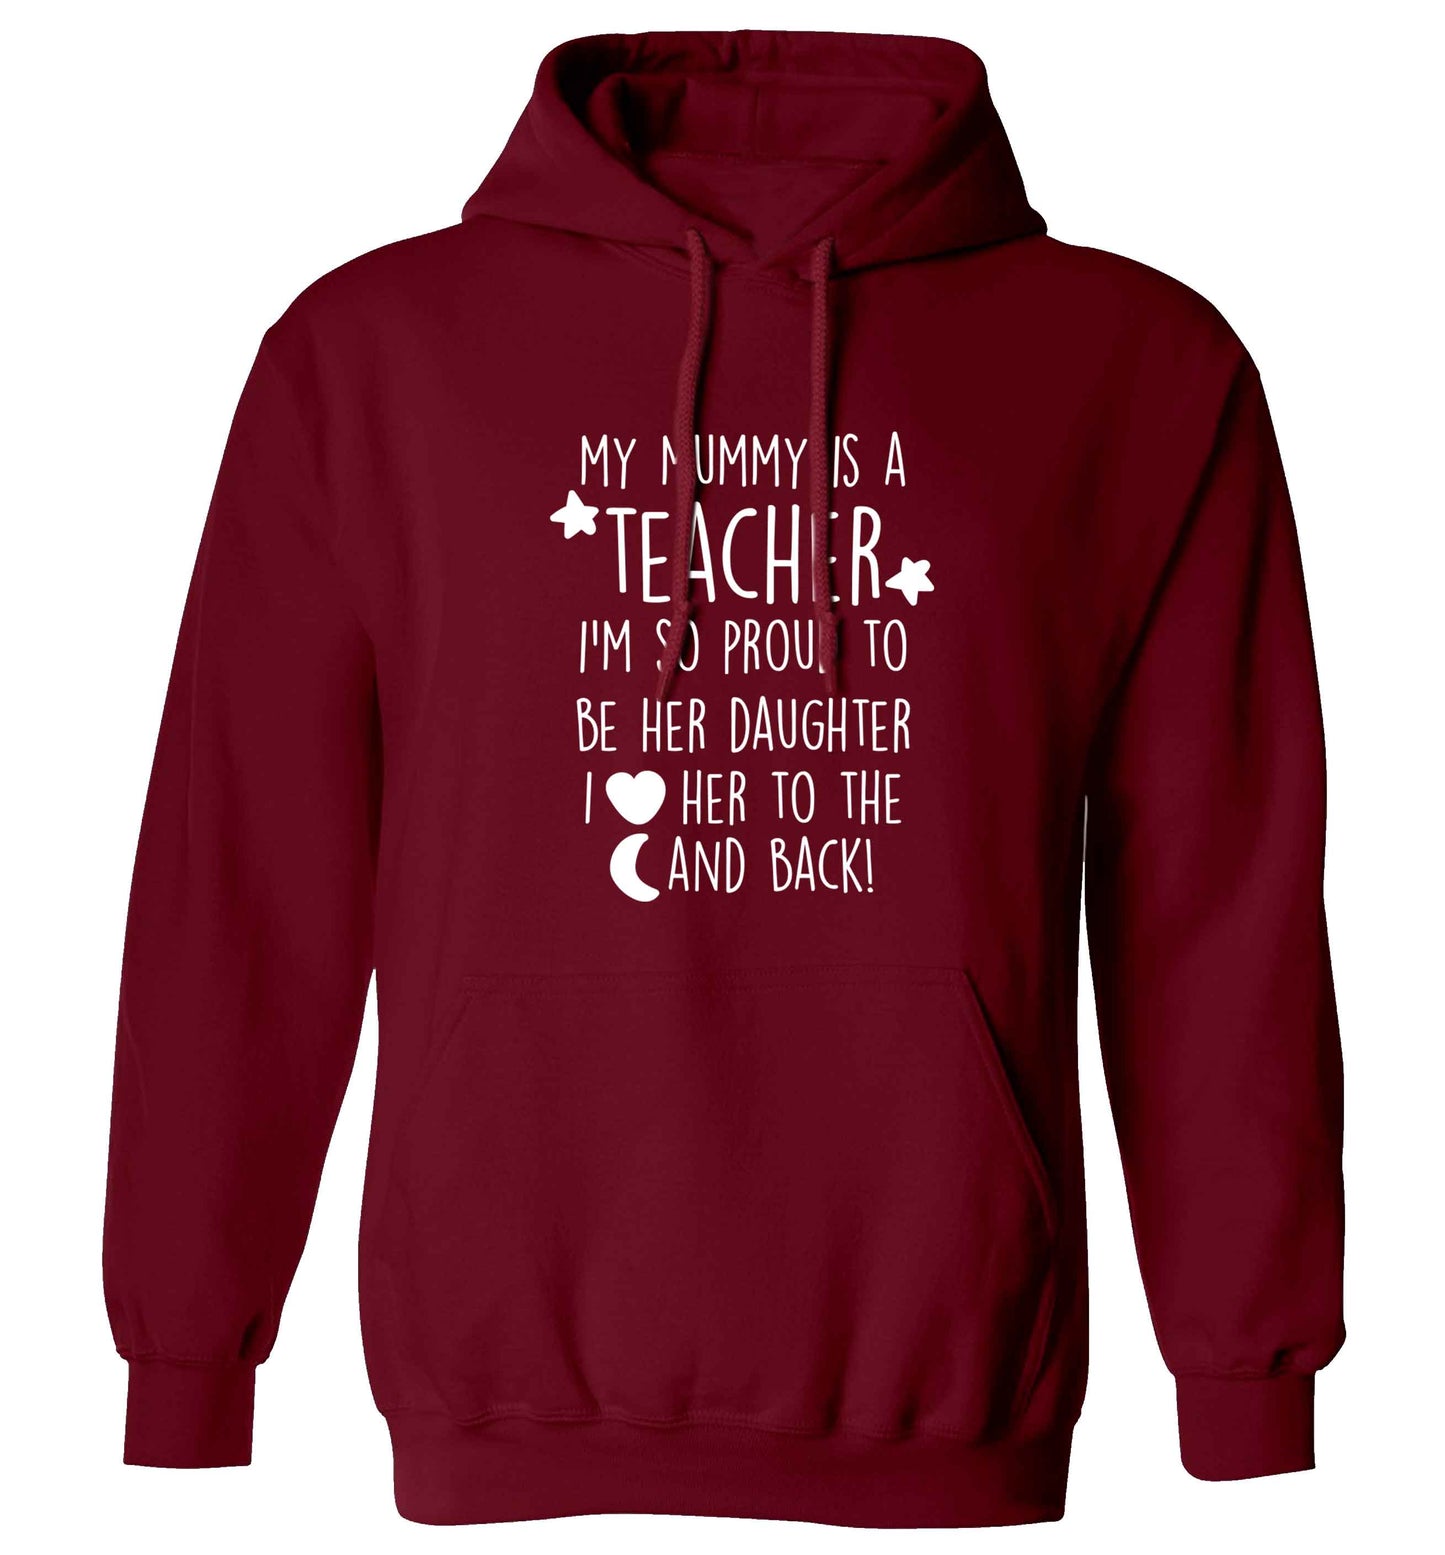 My mummy is a teacher I'm so proud to be her daughter I love her to the moon and back adults unisex maroon hoodie 2XL